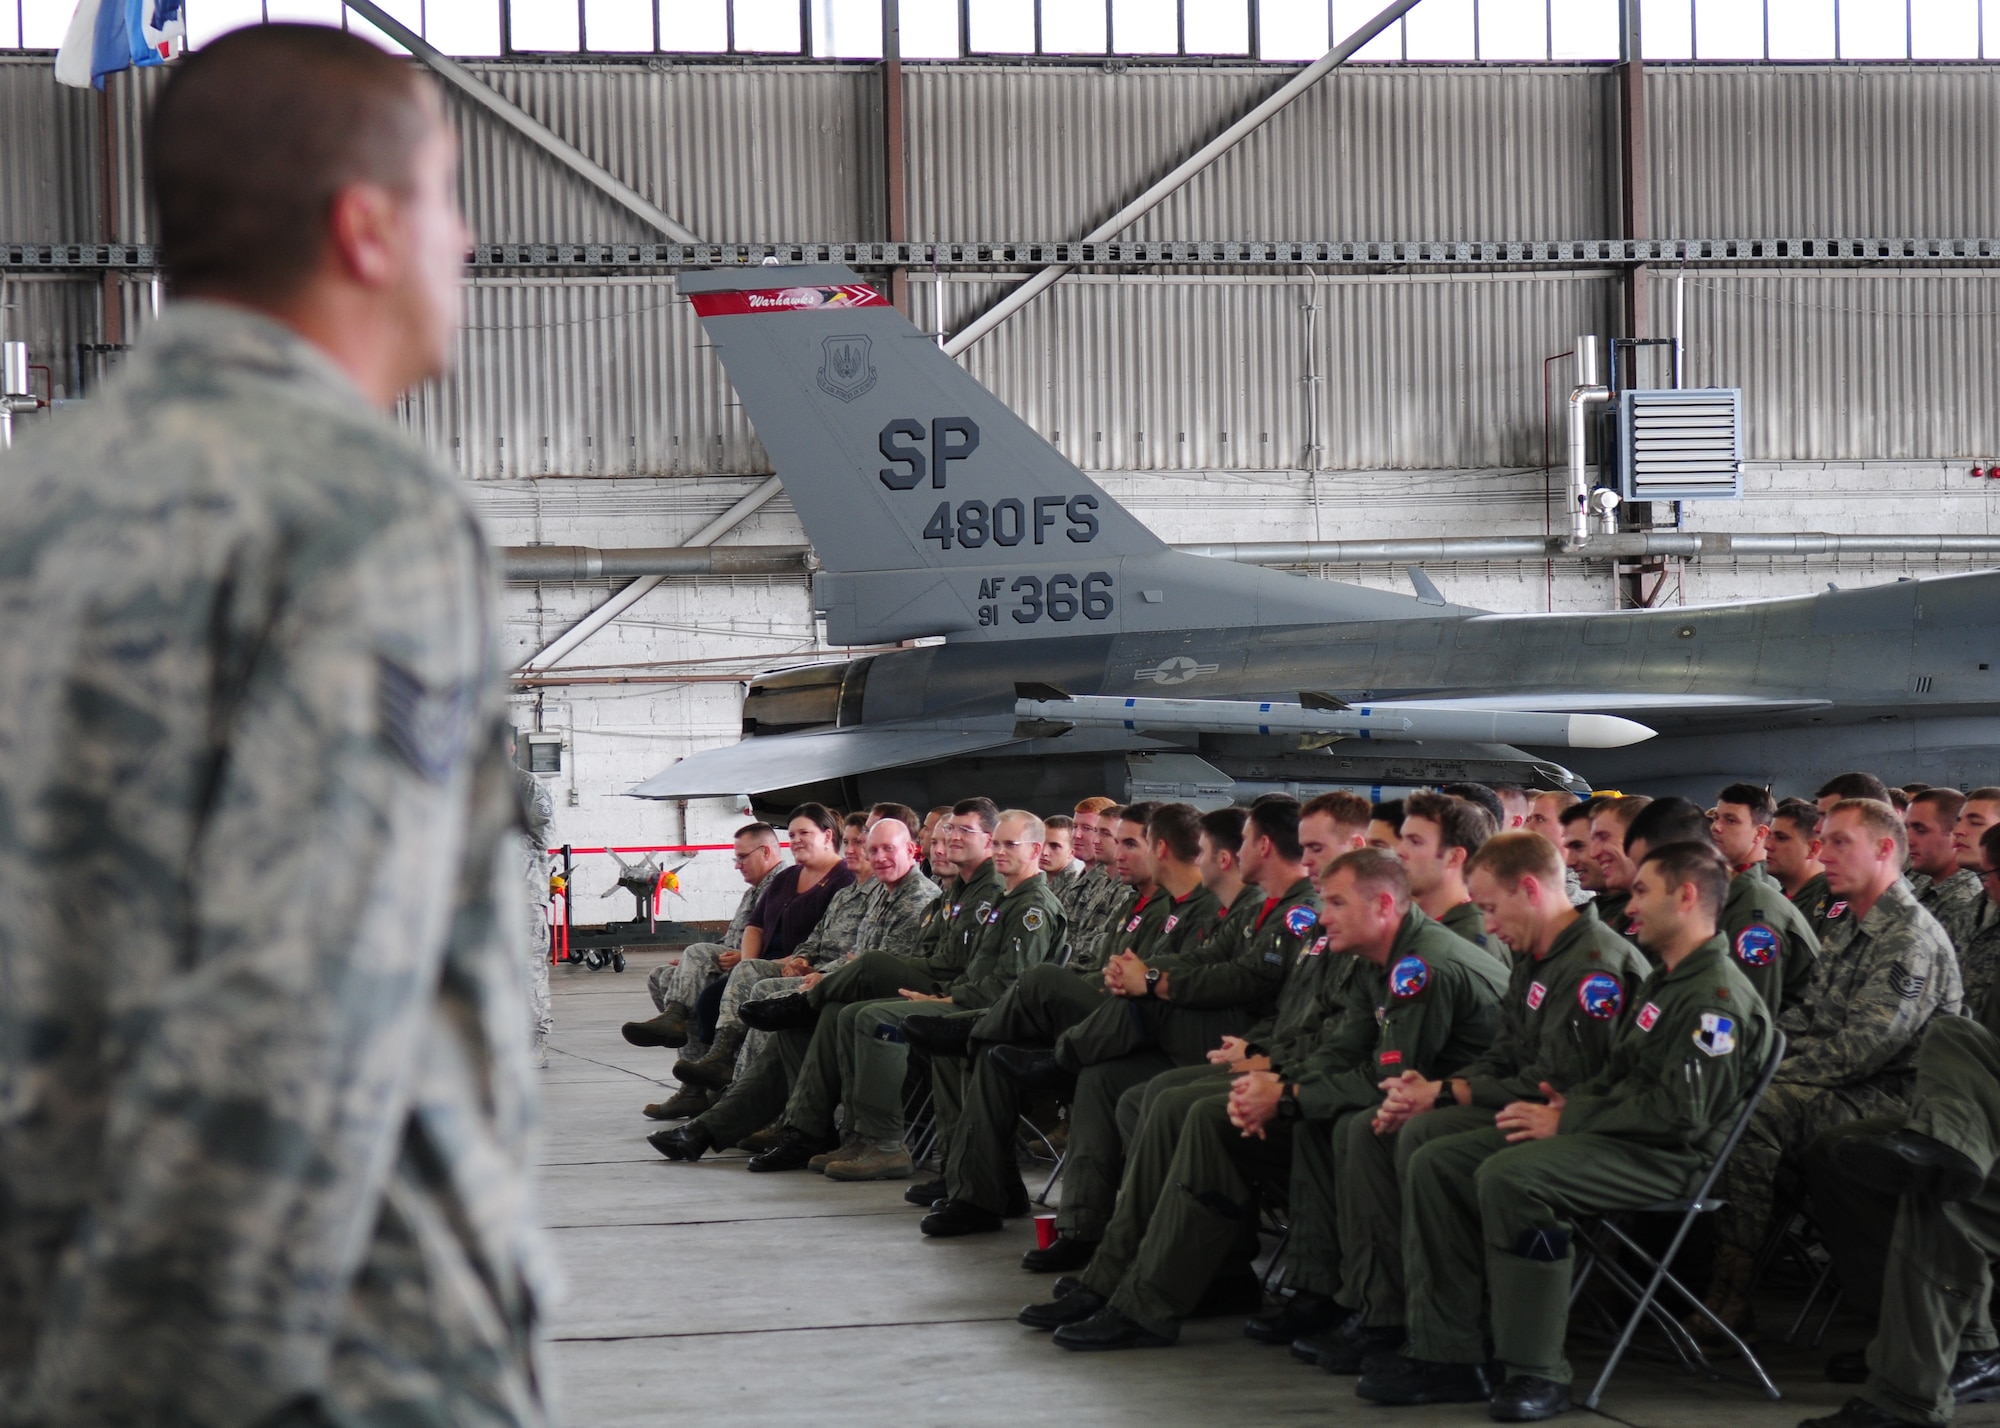 SPANGDAHLEM AIR BASE, Germany – The 480th flagship aircraft sits on static display during the Dedicated Crew Chief Ceremony Aug 13. This ceremony followed the activation of the 480th Fighter Squadron here, assigning dedicated crew chiefs to specific aircraft in the new squadron. "It's a symbolic act that shows we have respect for them and they have a high degree of responsibility for the work they perform," said Lt. Col. Andrew Wolcott, 480th FS commander. (U.S. Air Force Photo by/Staff Sgt. Heather M. Norris)